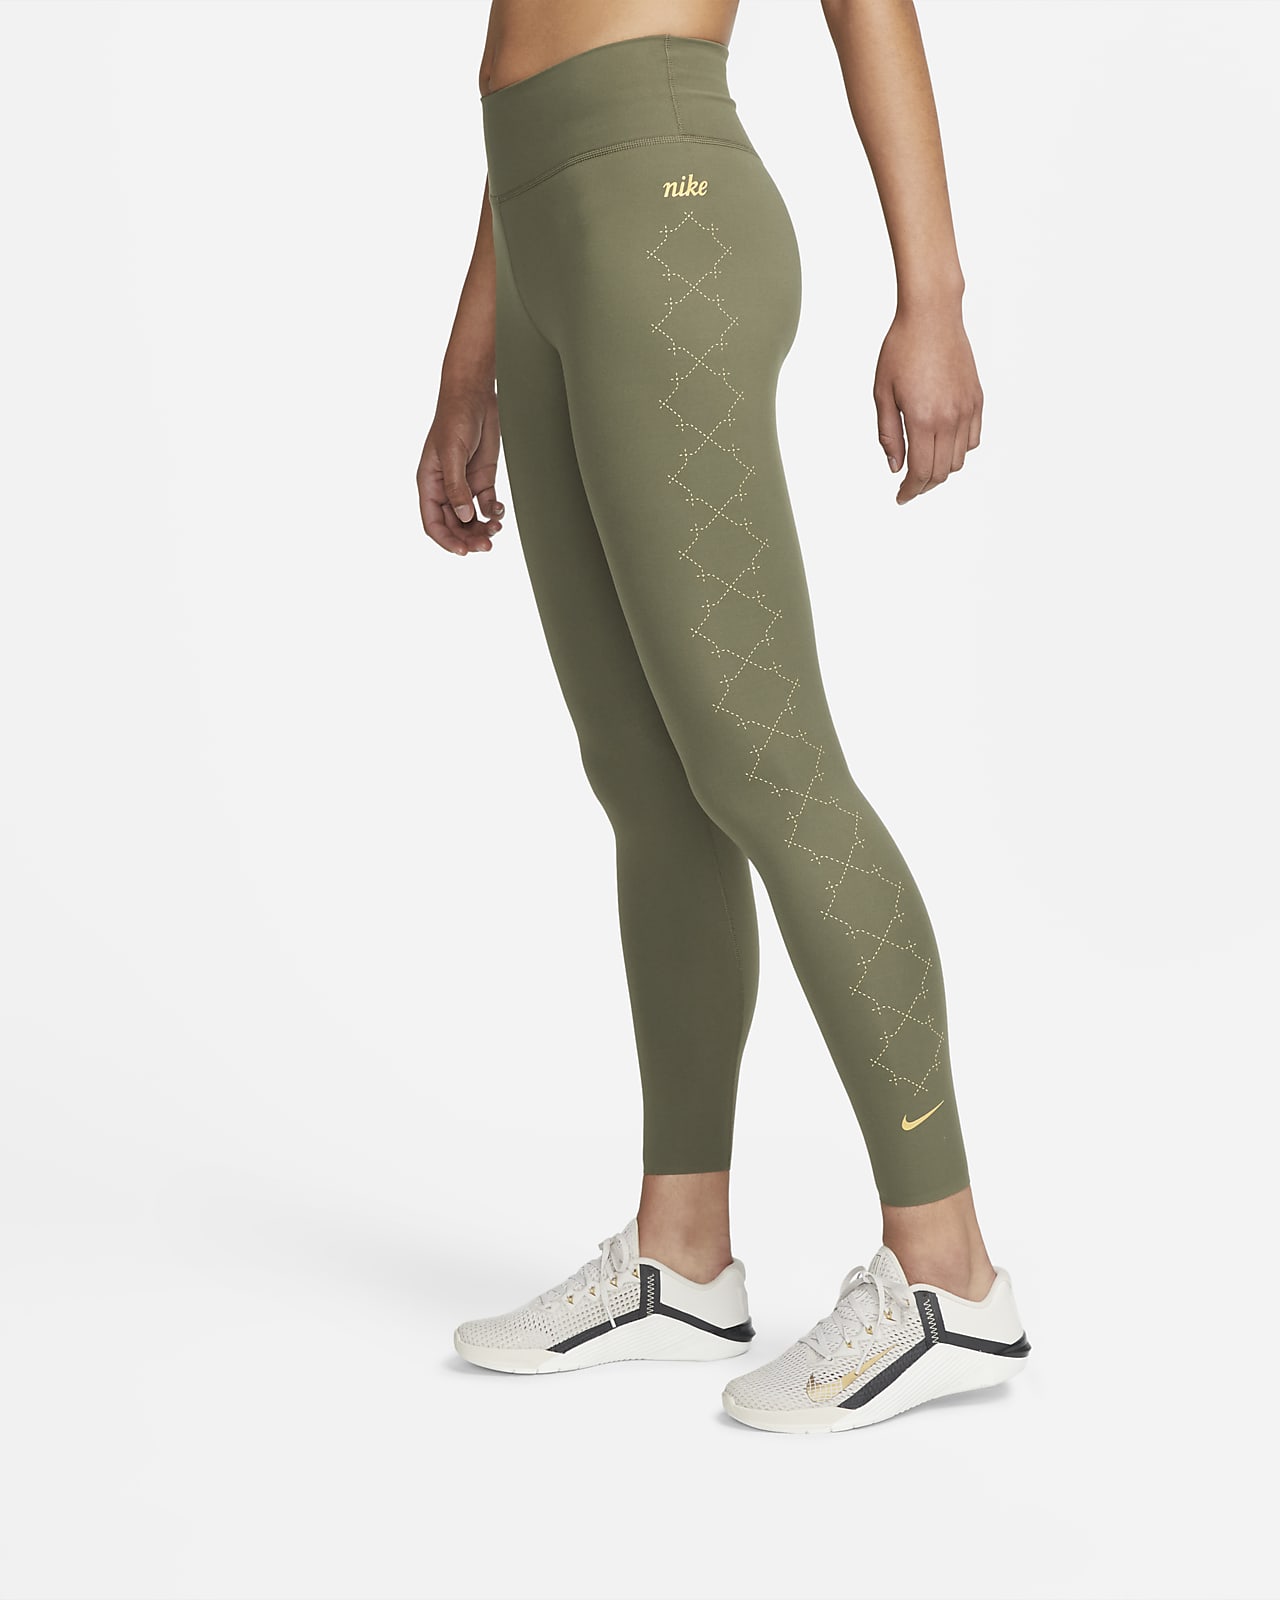 Legging 7/8 taille mi-basse Nike Dri-FIT One Luxe pour Femme